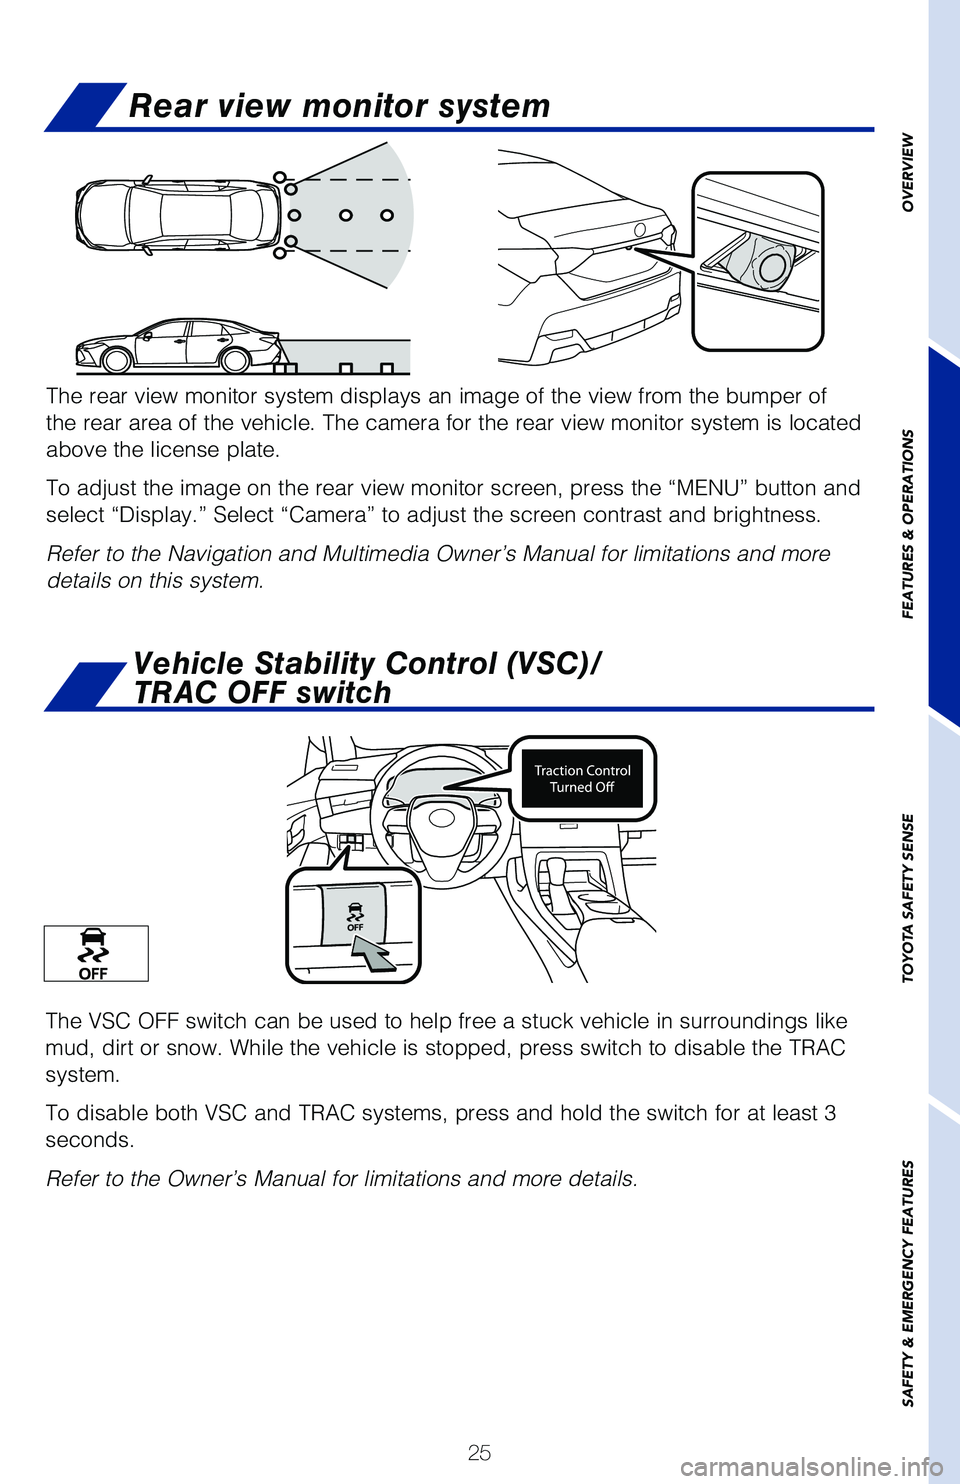 TOYOTA AVALON HYBRID 2021  Owners Manual (in English) 25
OVERVIEW
FEATURES & OPERATIONS
TOYOTA SAFETY SENSE
SAFETY & EMERGENCY FEATURES
Rear view monitor system
The rear view monitor system displays an image of the view from the bump\
er of 
the rear are